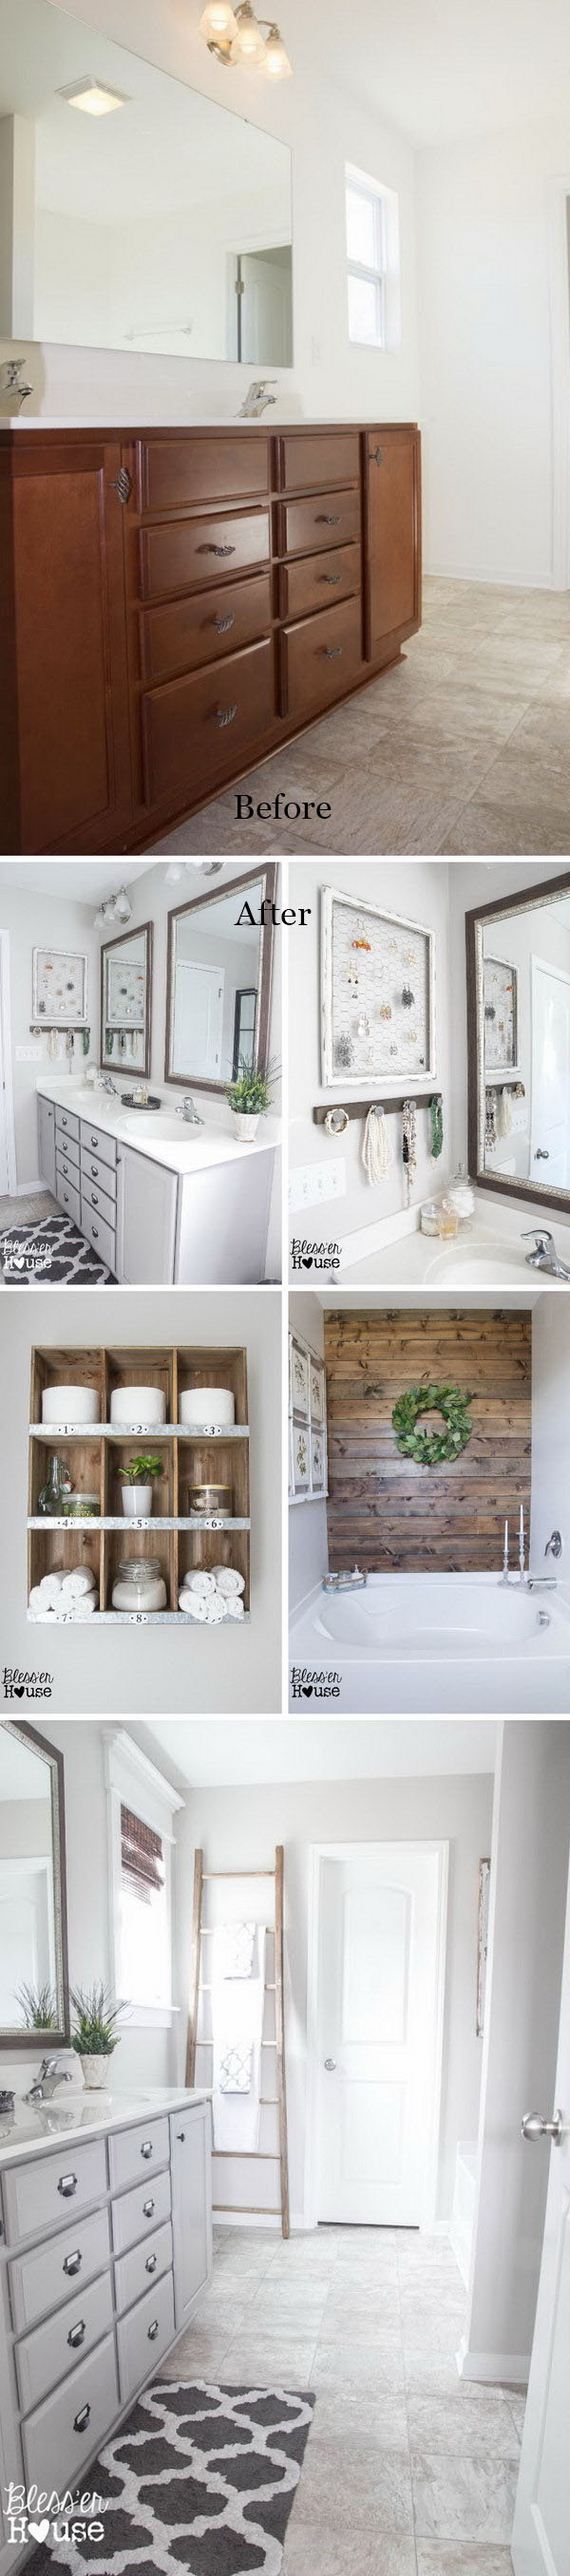 07-awesome-bathroom-makeovers